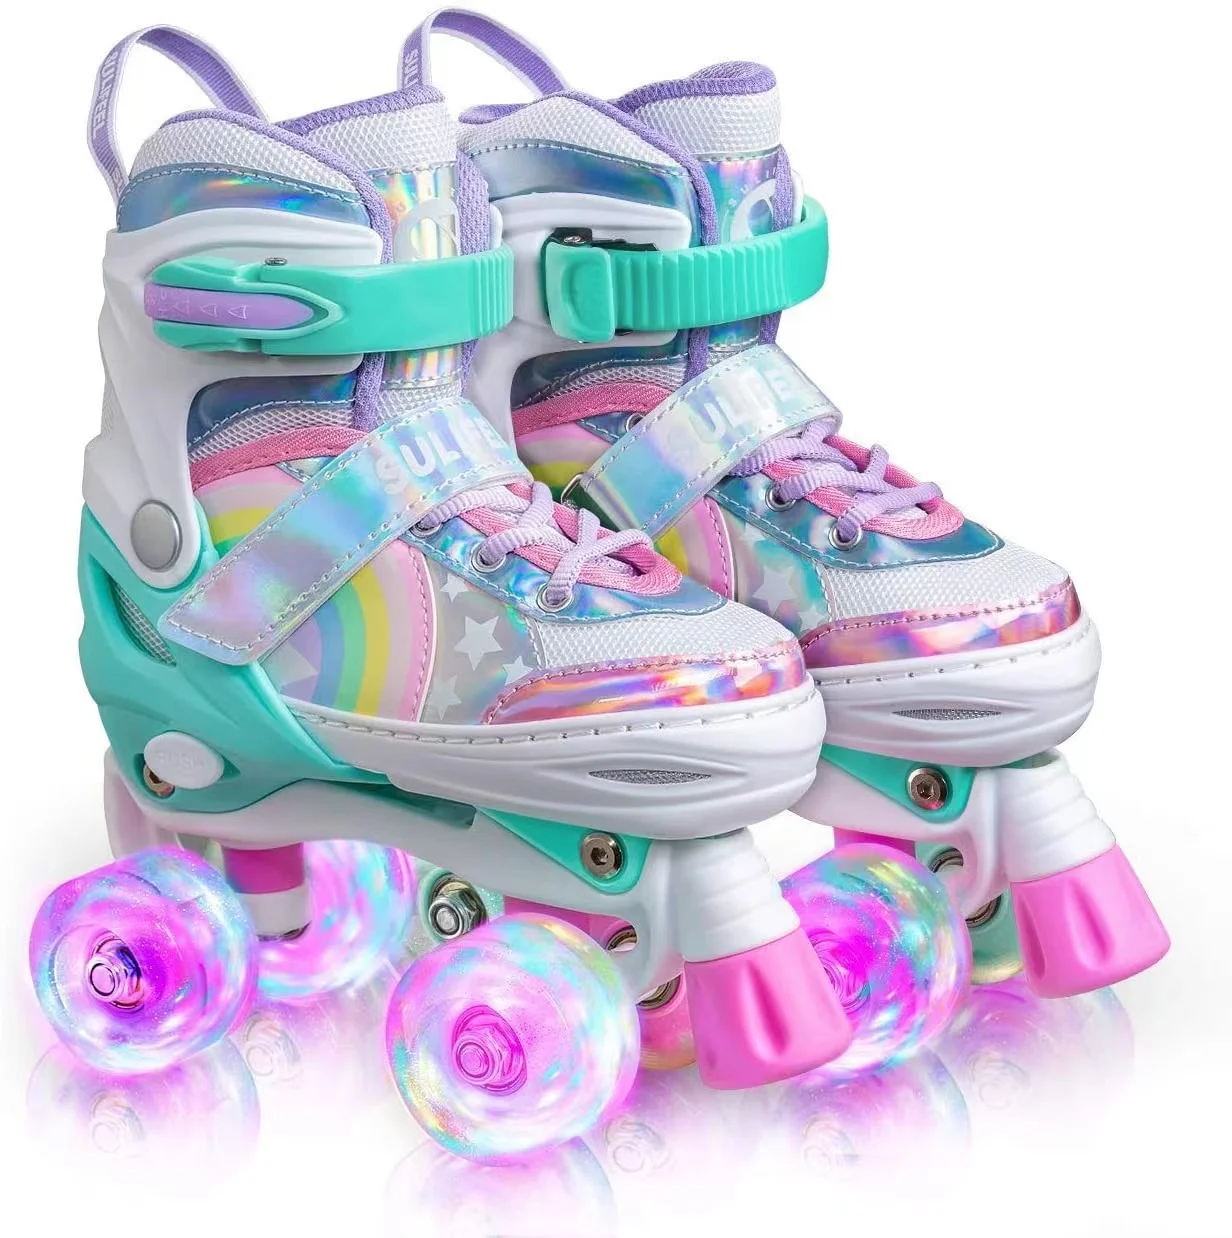 Girls Kids Roller Skates PU Skating Shoes Sliding Quad Sneakers 4 Wheels 2 Row Line Outdoor Gym Sports Skate Shoes Patines